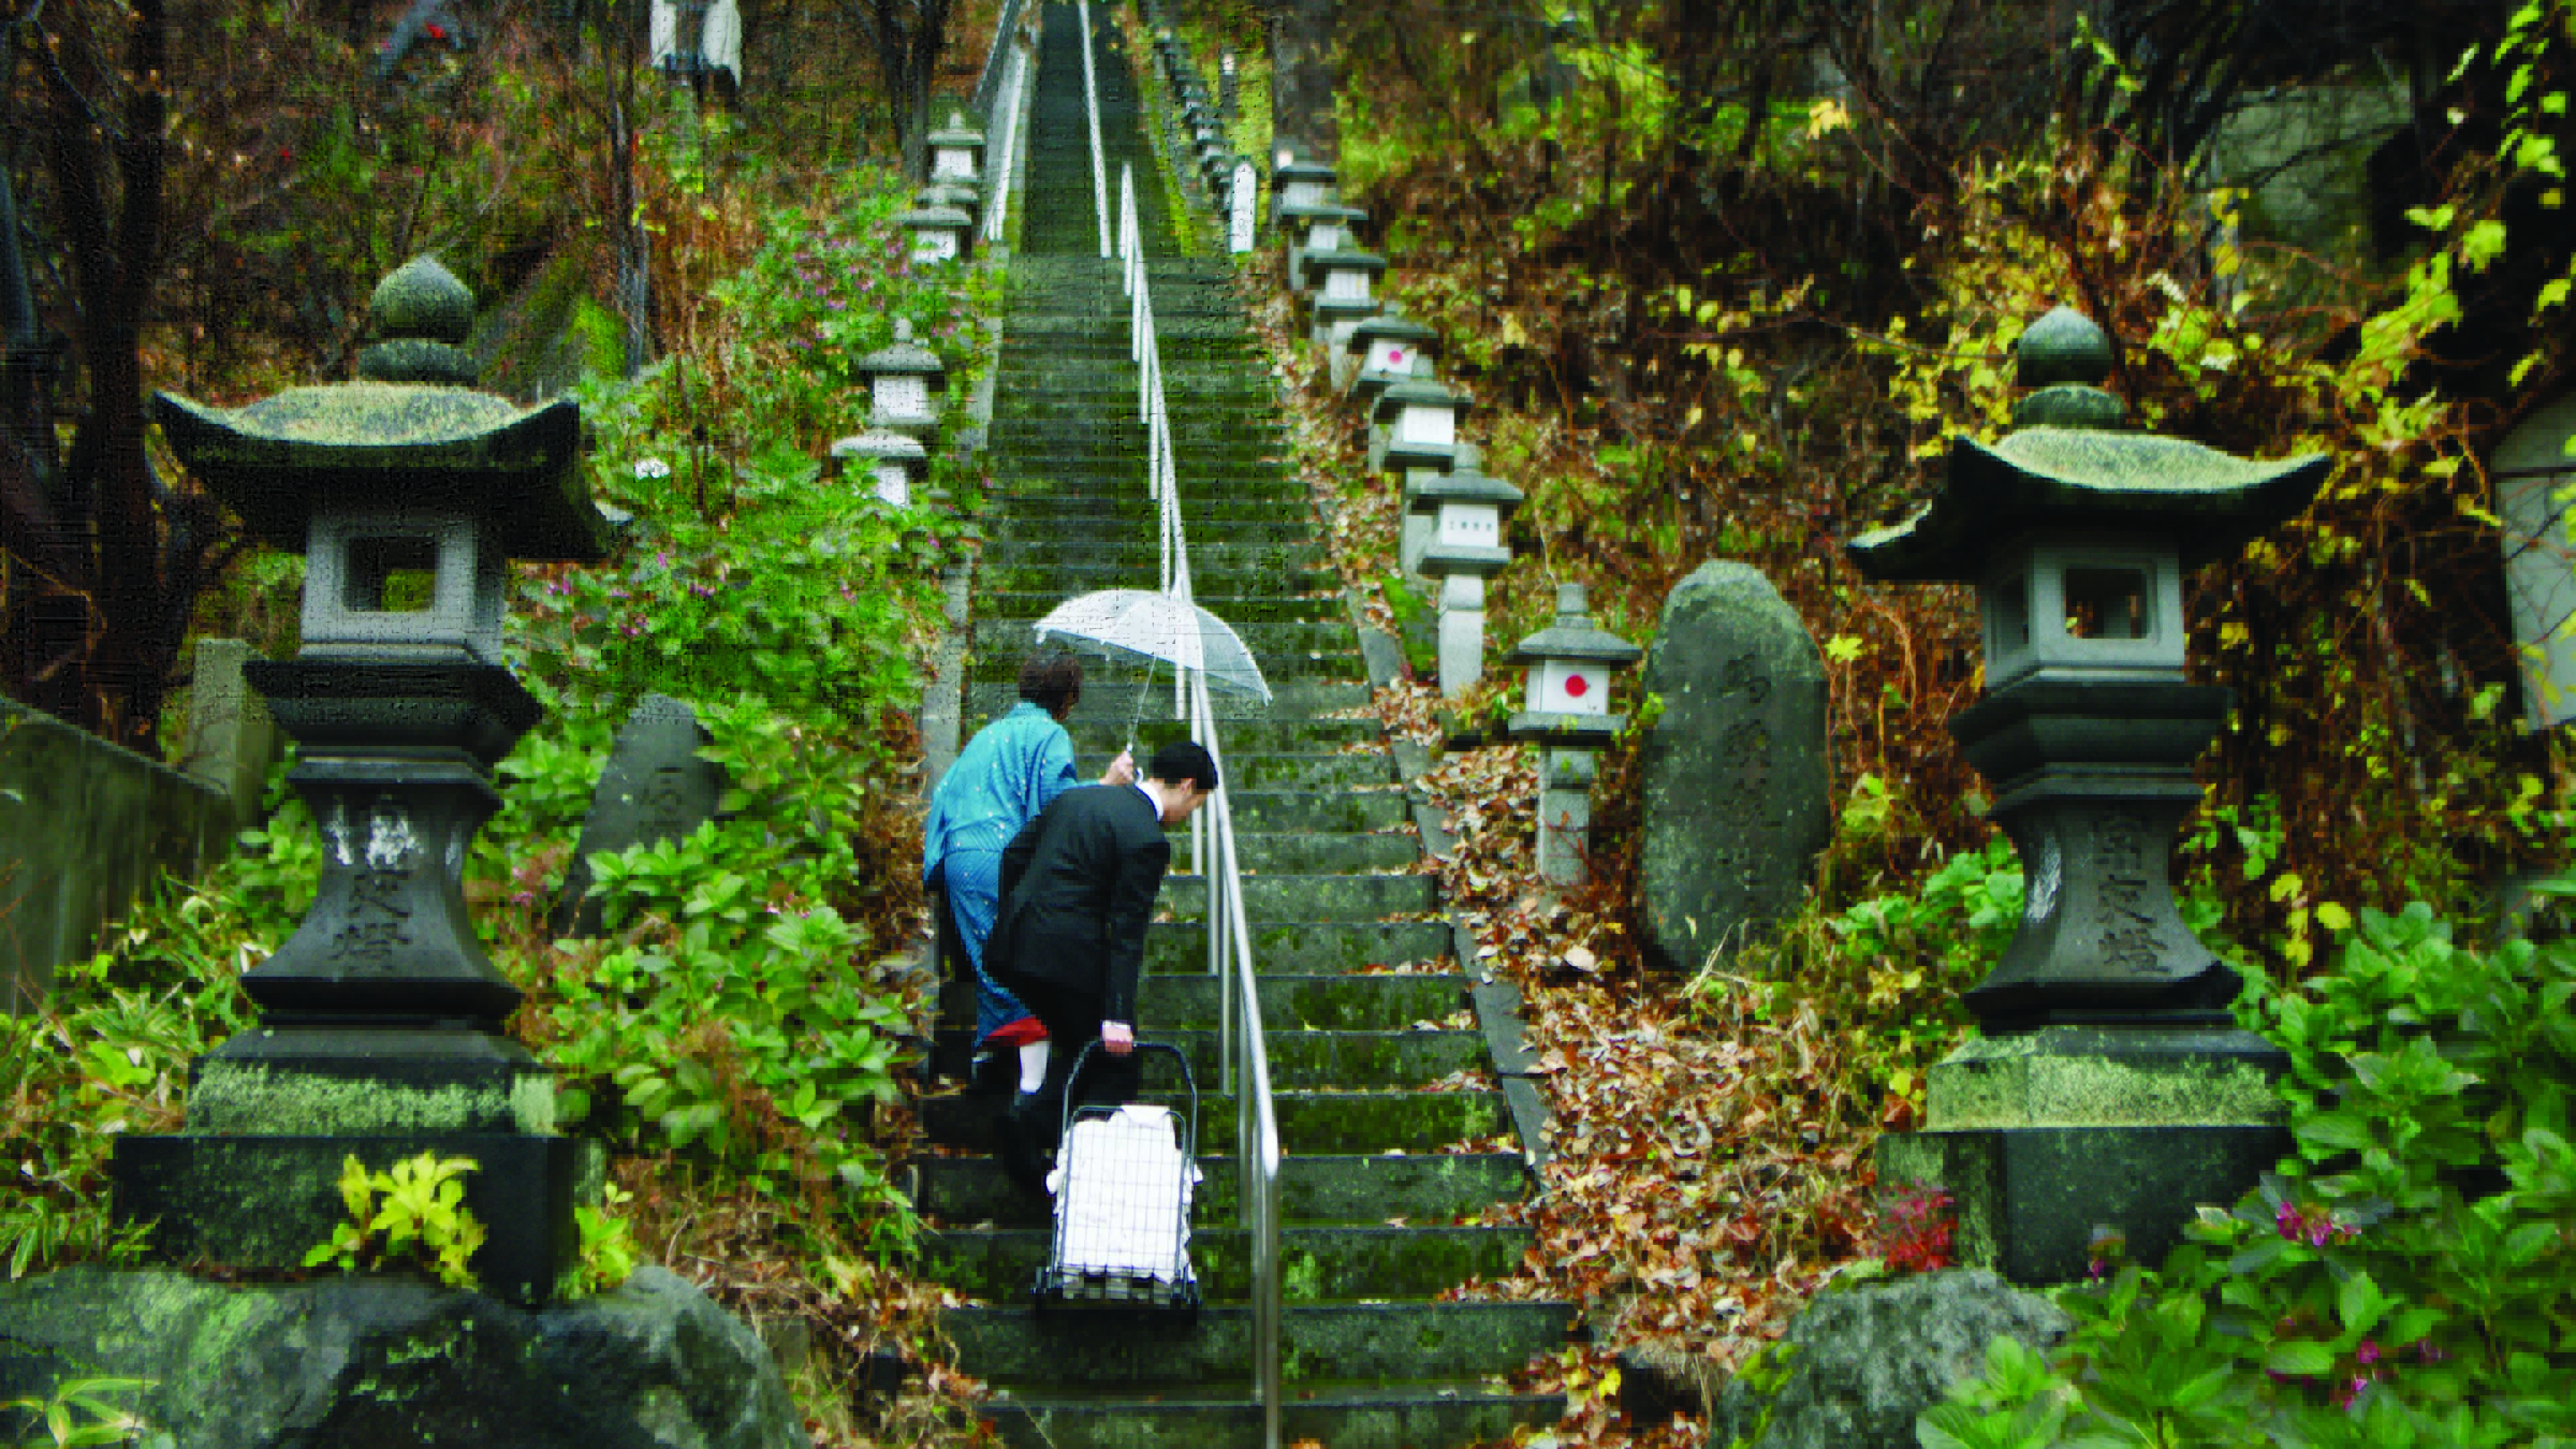 A still from the film, Between Us, of a man and woman walking up steps in rural Japan.